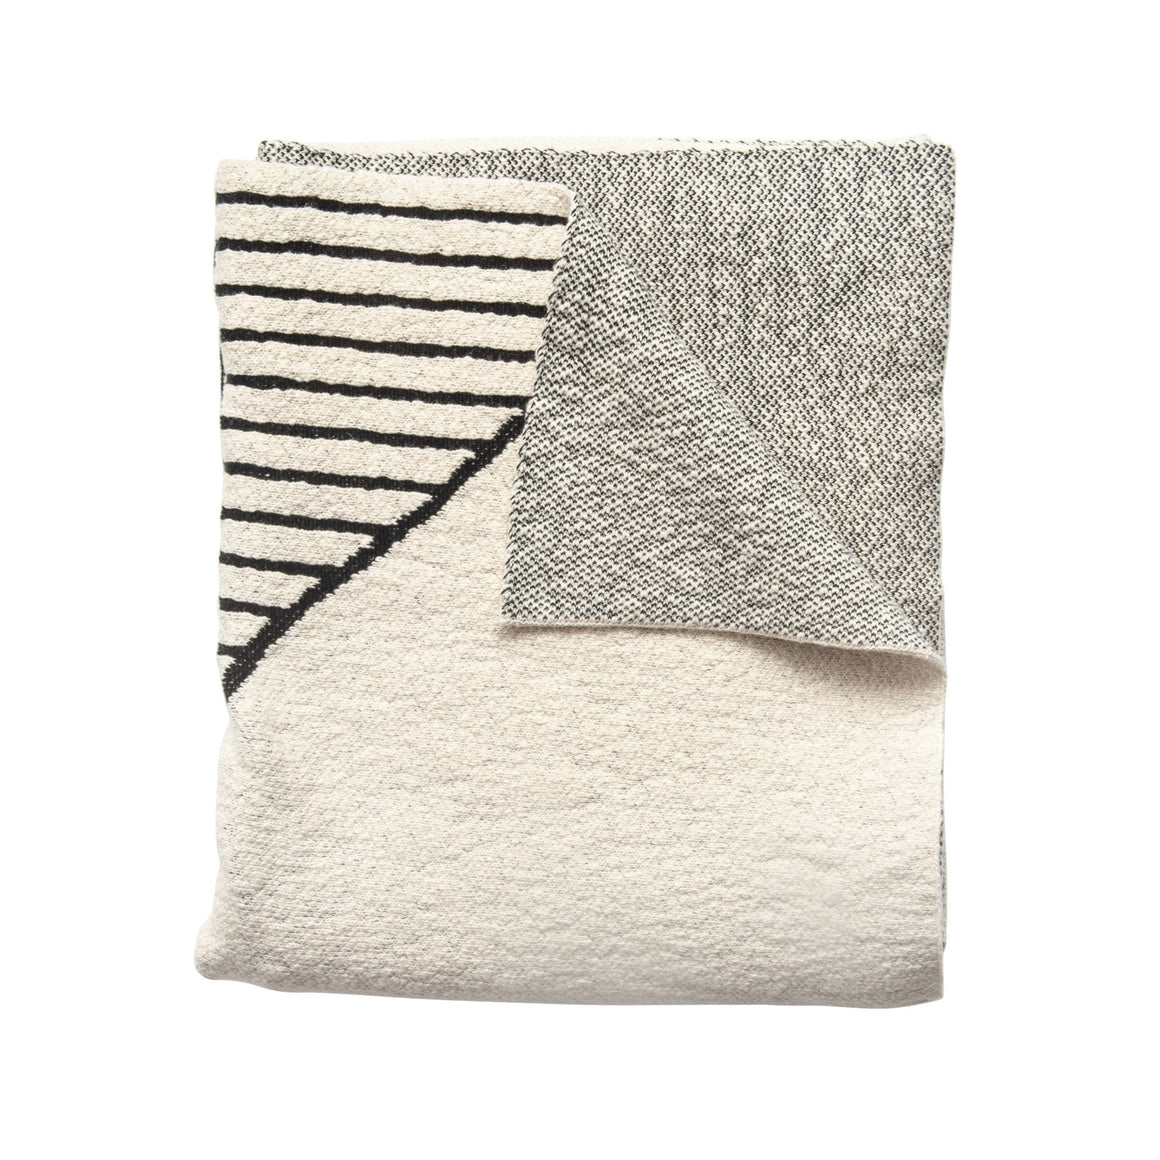 Black & Cream Patterned Knit Throw